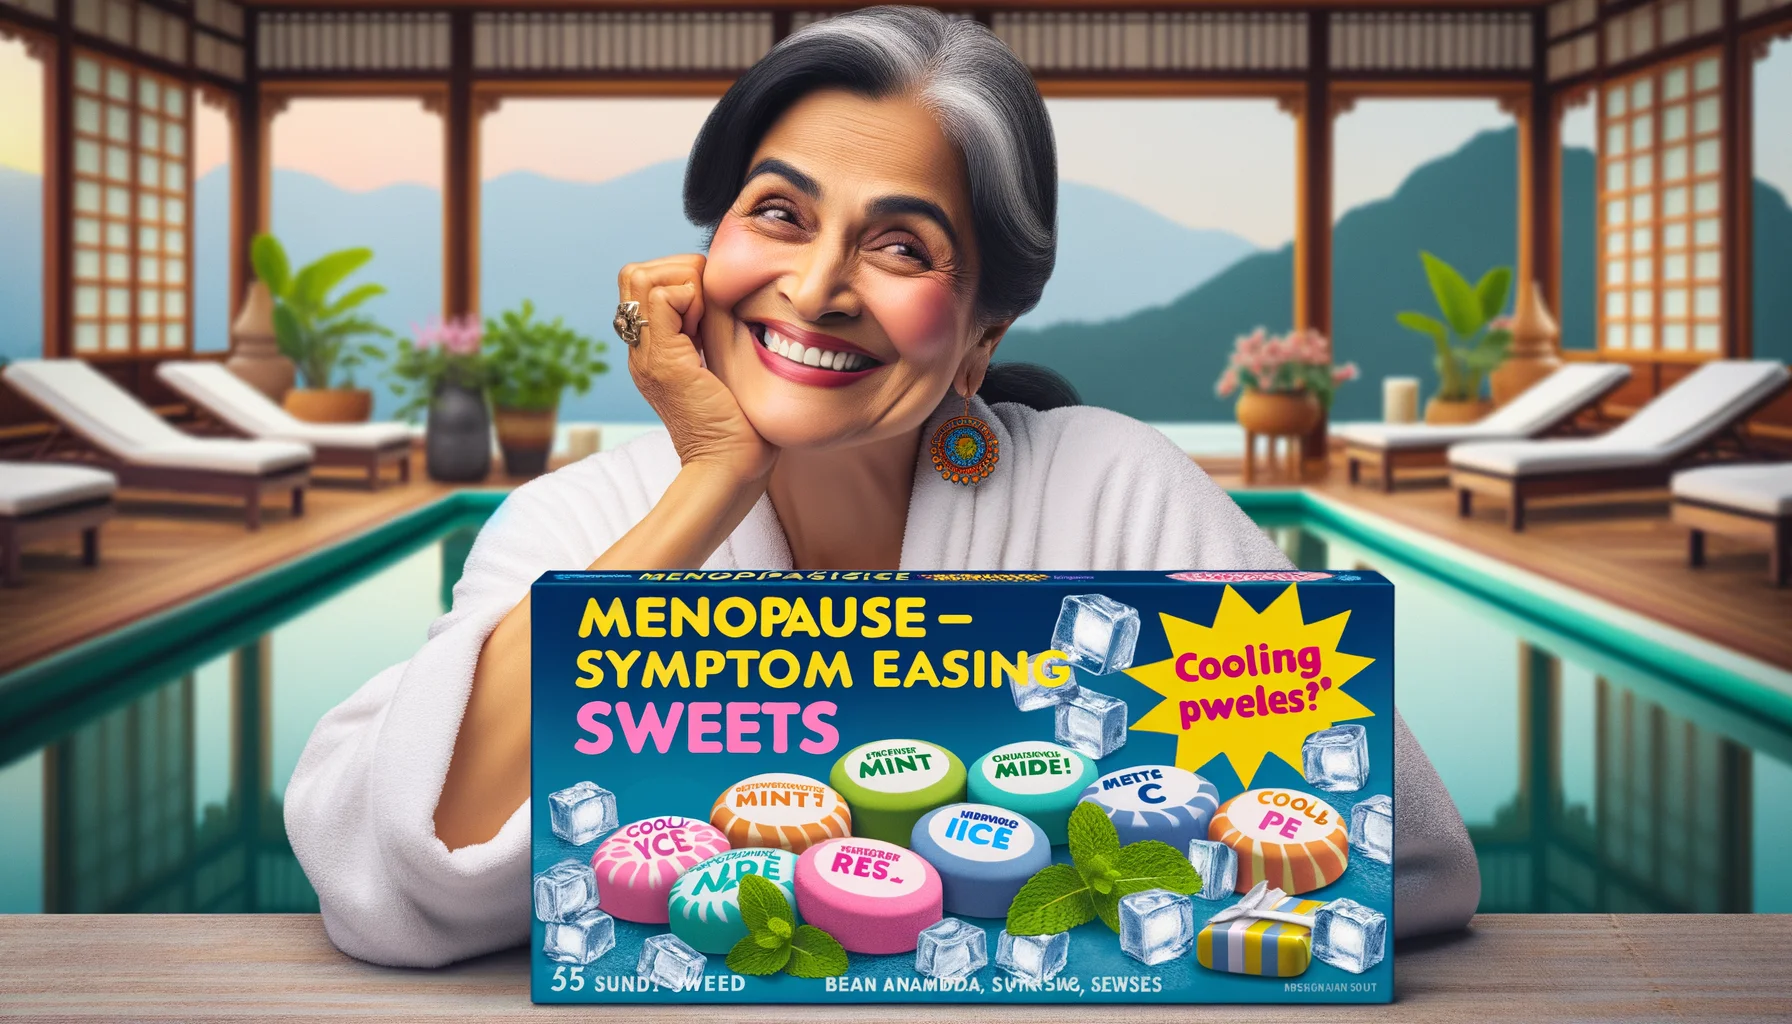 The image is a humorously designed advertisement for a product known as 'Menopause-Symptom Easing Sweets.' In the image, a middle-aged woman of South Asian descent, with a beaming smile, is at a serene spa environment. She's seen enjoying one of the 'Menopause-Symptom Easing Sweets' labelled with cooling elements like mint and ice, suggesting its symptom-relieving properties. The sweets are displayed in colorful packaging with fun, vibrant 'cooling' design motifs. In the background, a peaceful scene of a spa with soft, tranquil colors adds to the mood of relaxation. The overall vibe is comical yet genuine, perfectly balancing humor with the reality of menopause.